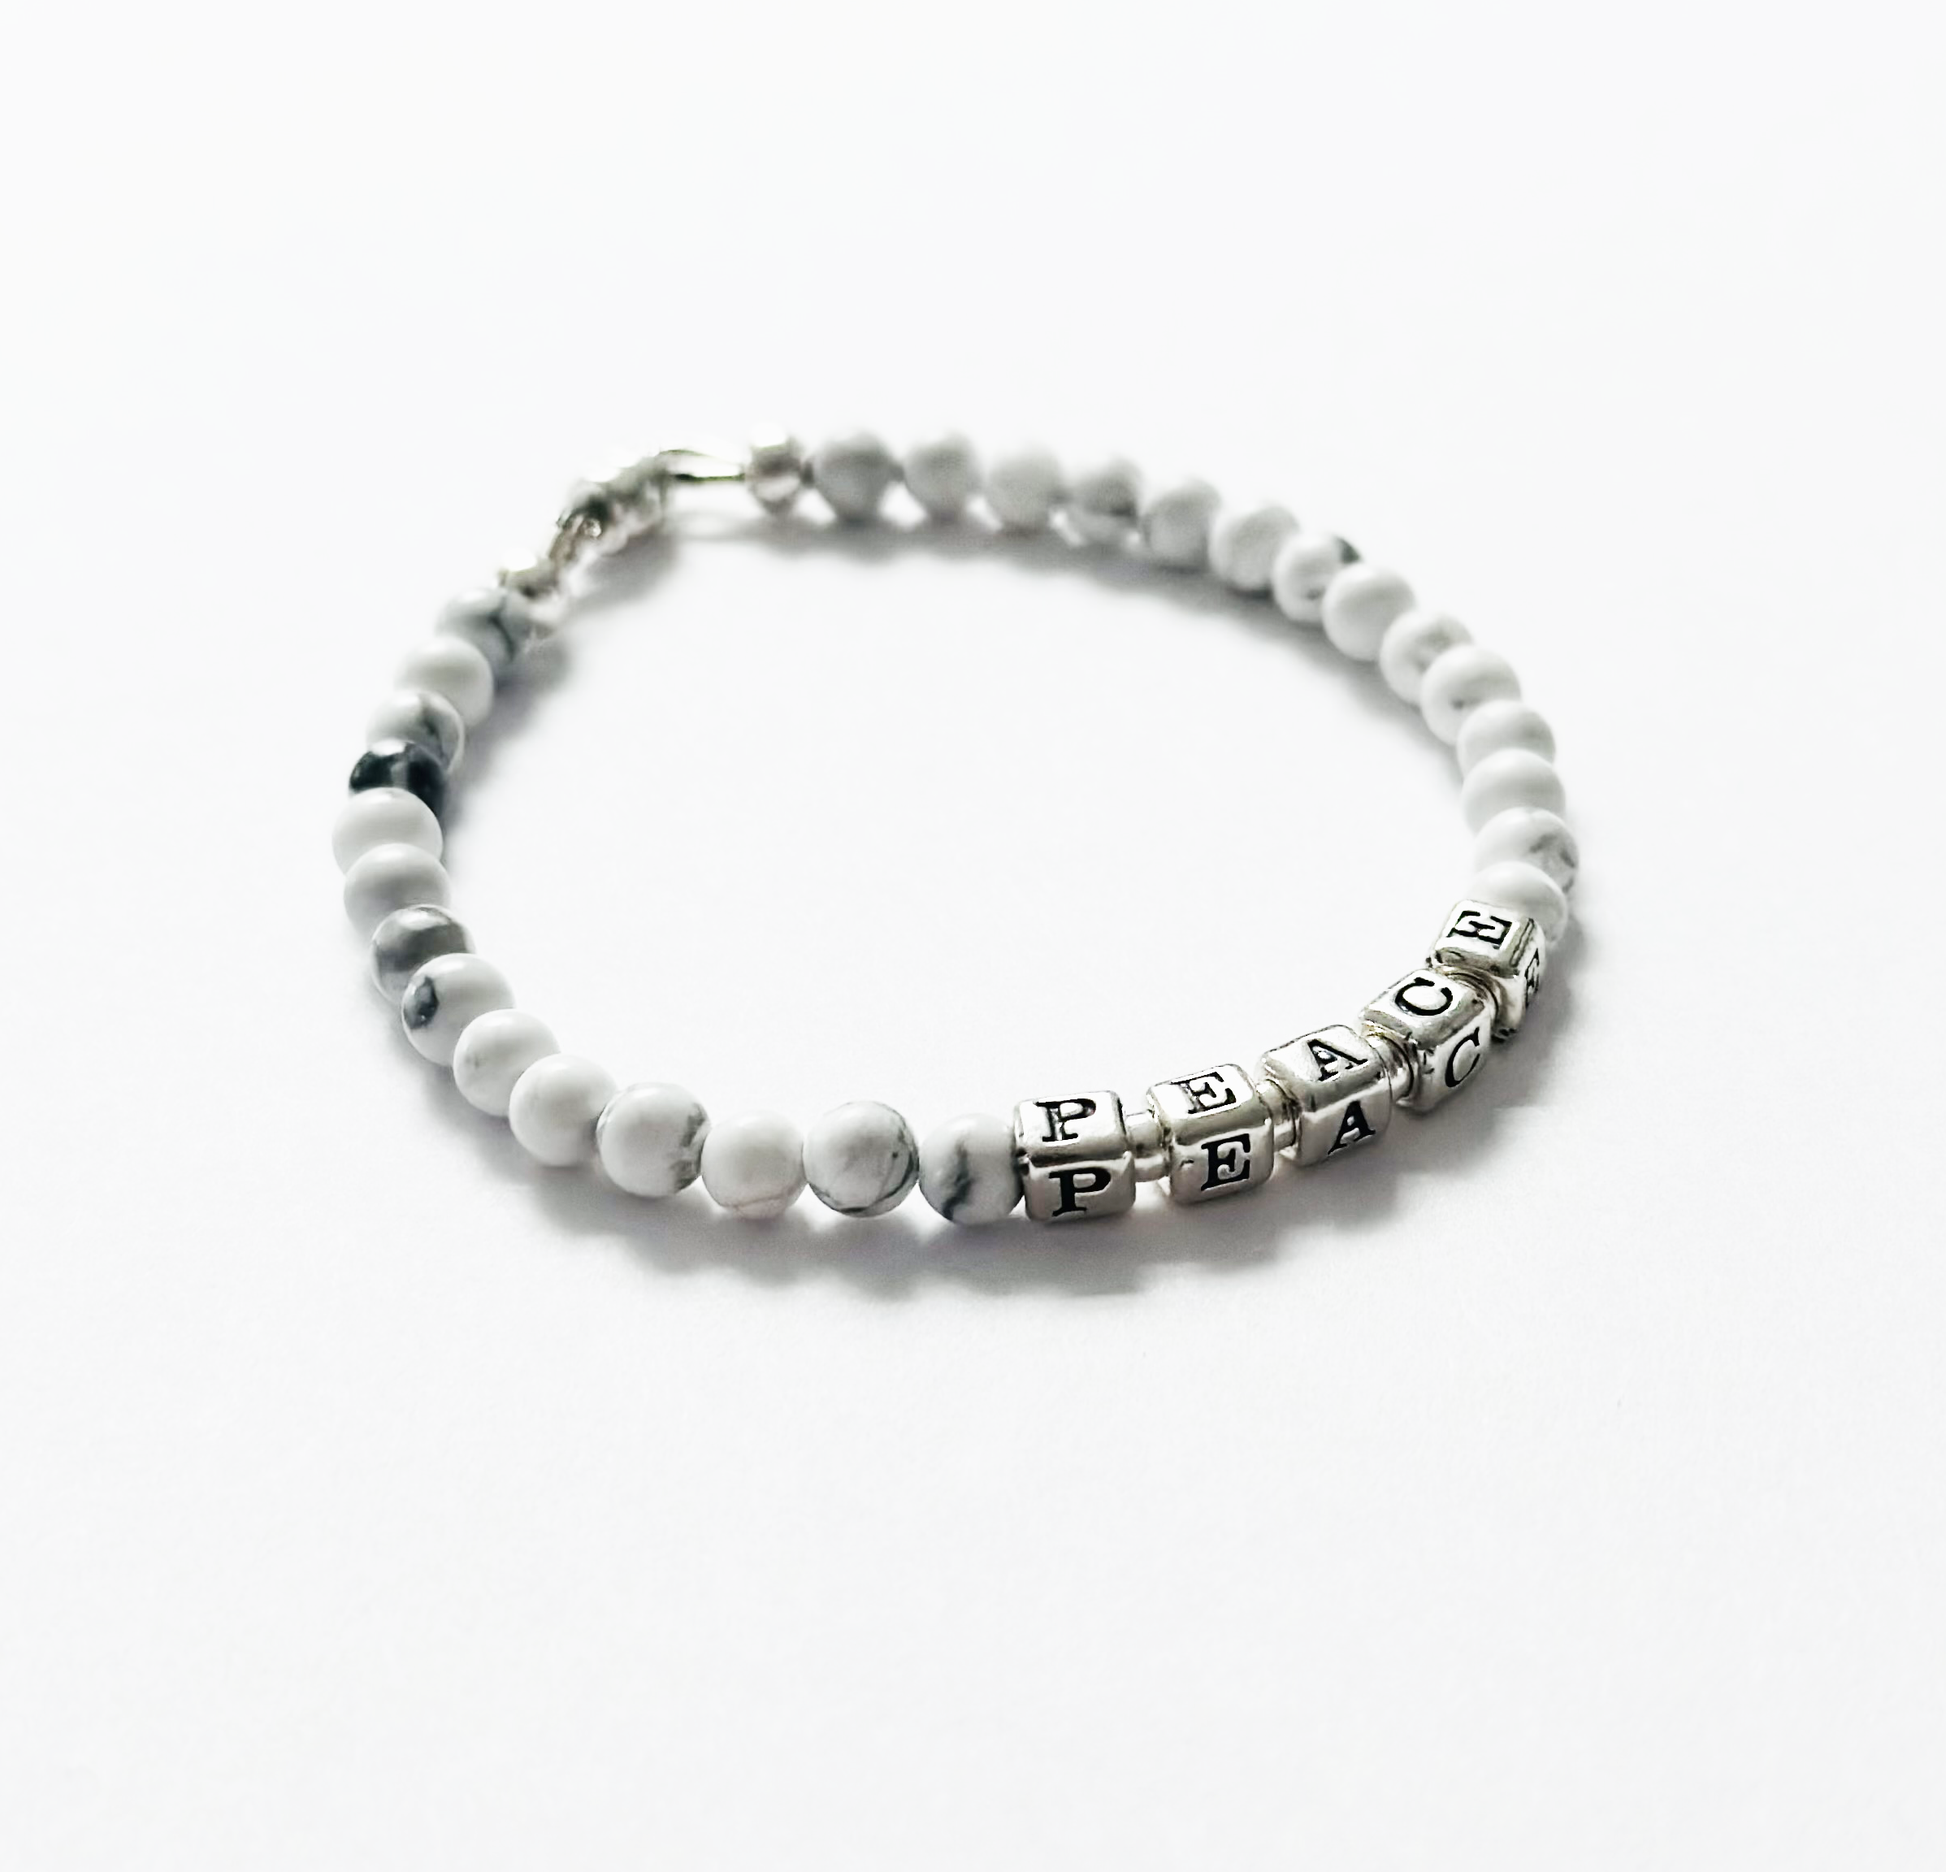 sterling silver peace bracelet with white gemstones